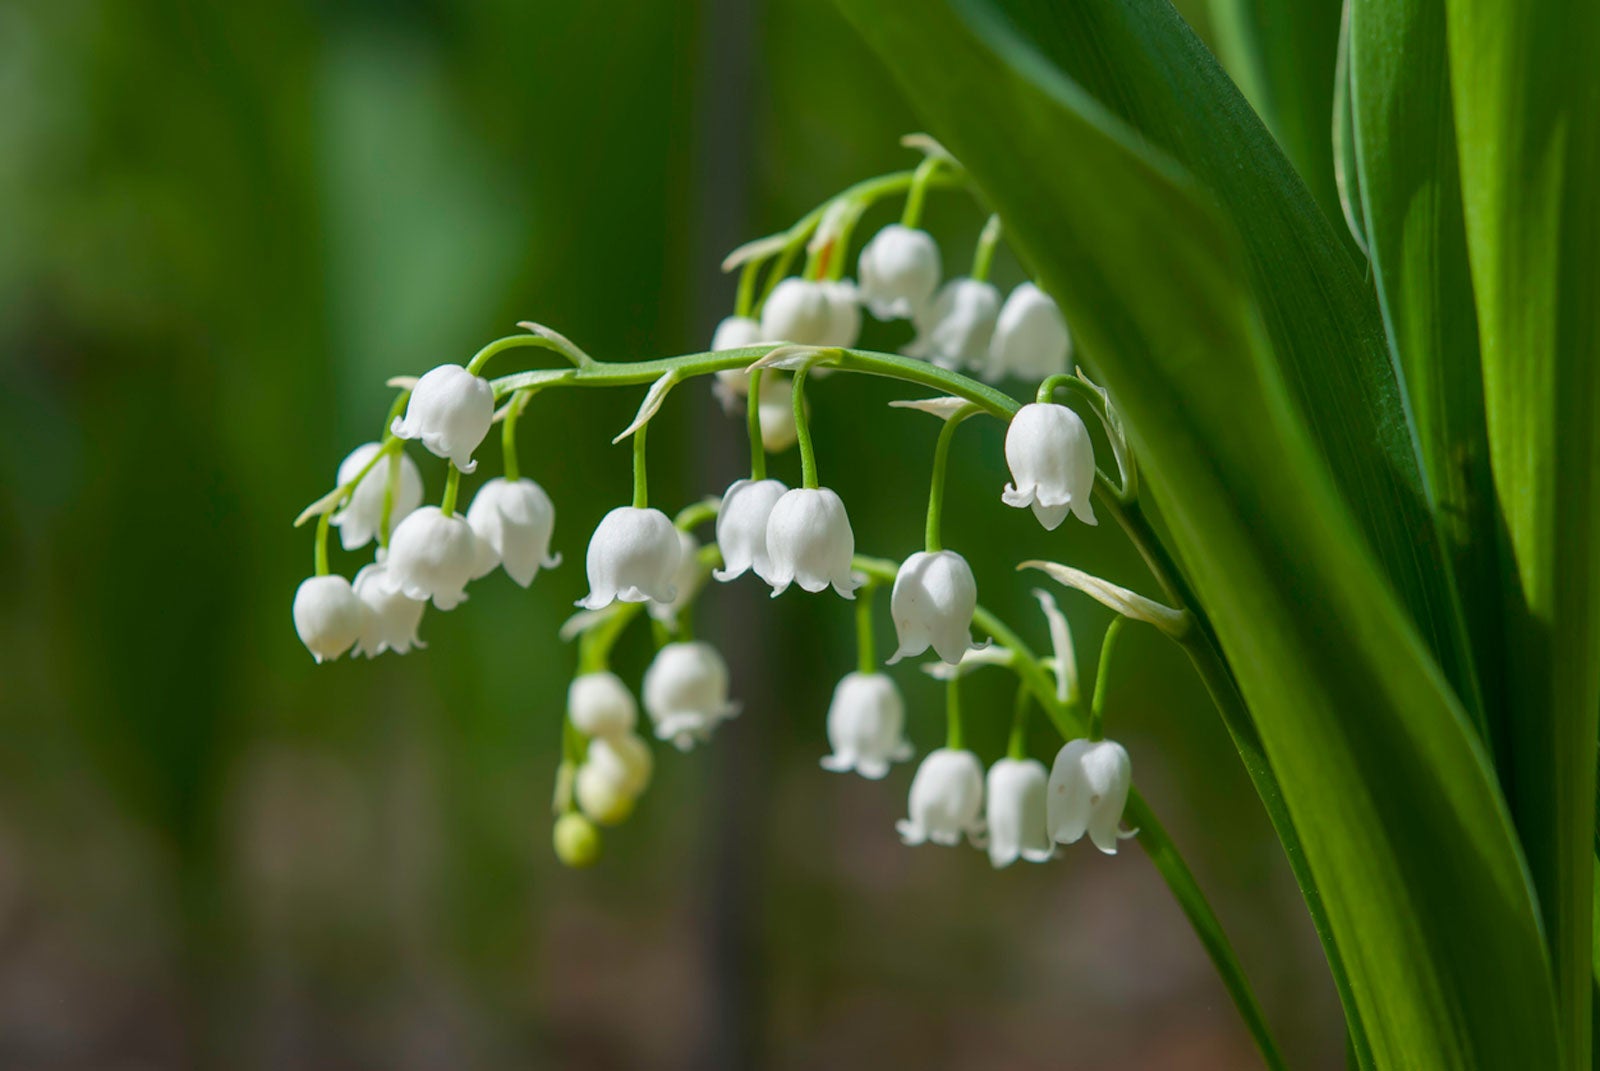 Planting Lily Of The Valley Flowers   How To Grow Lily Of The ...